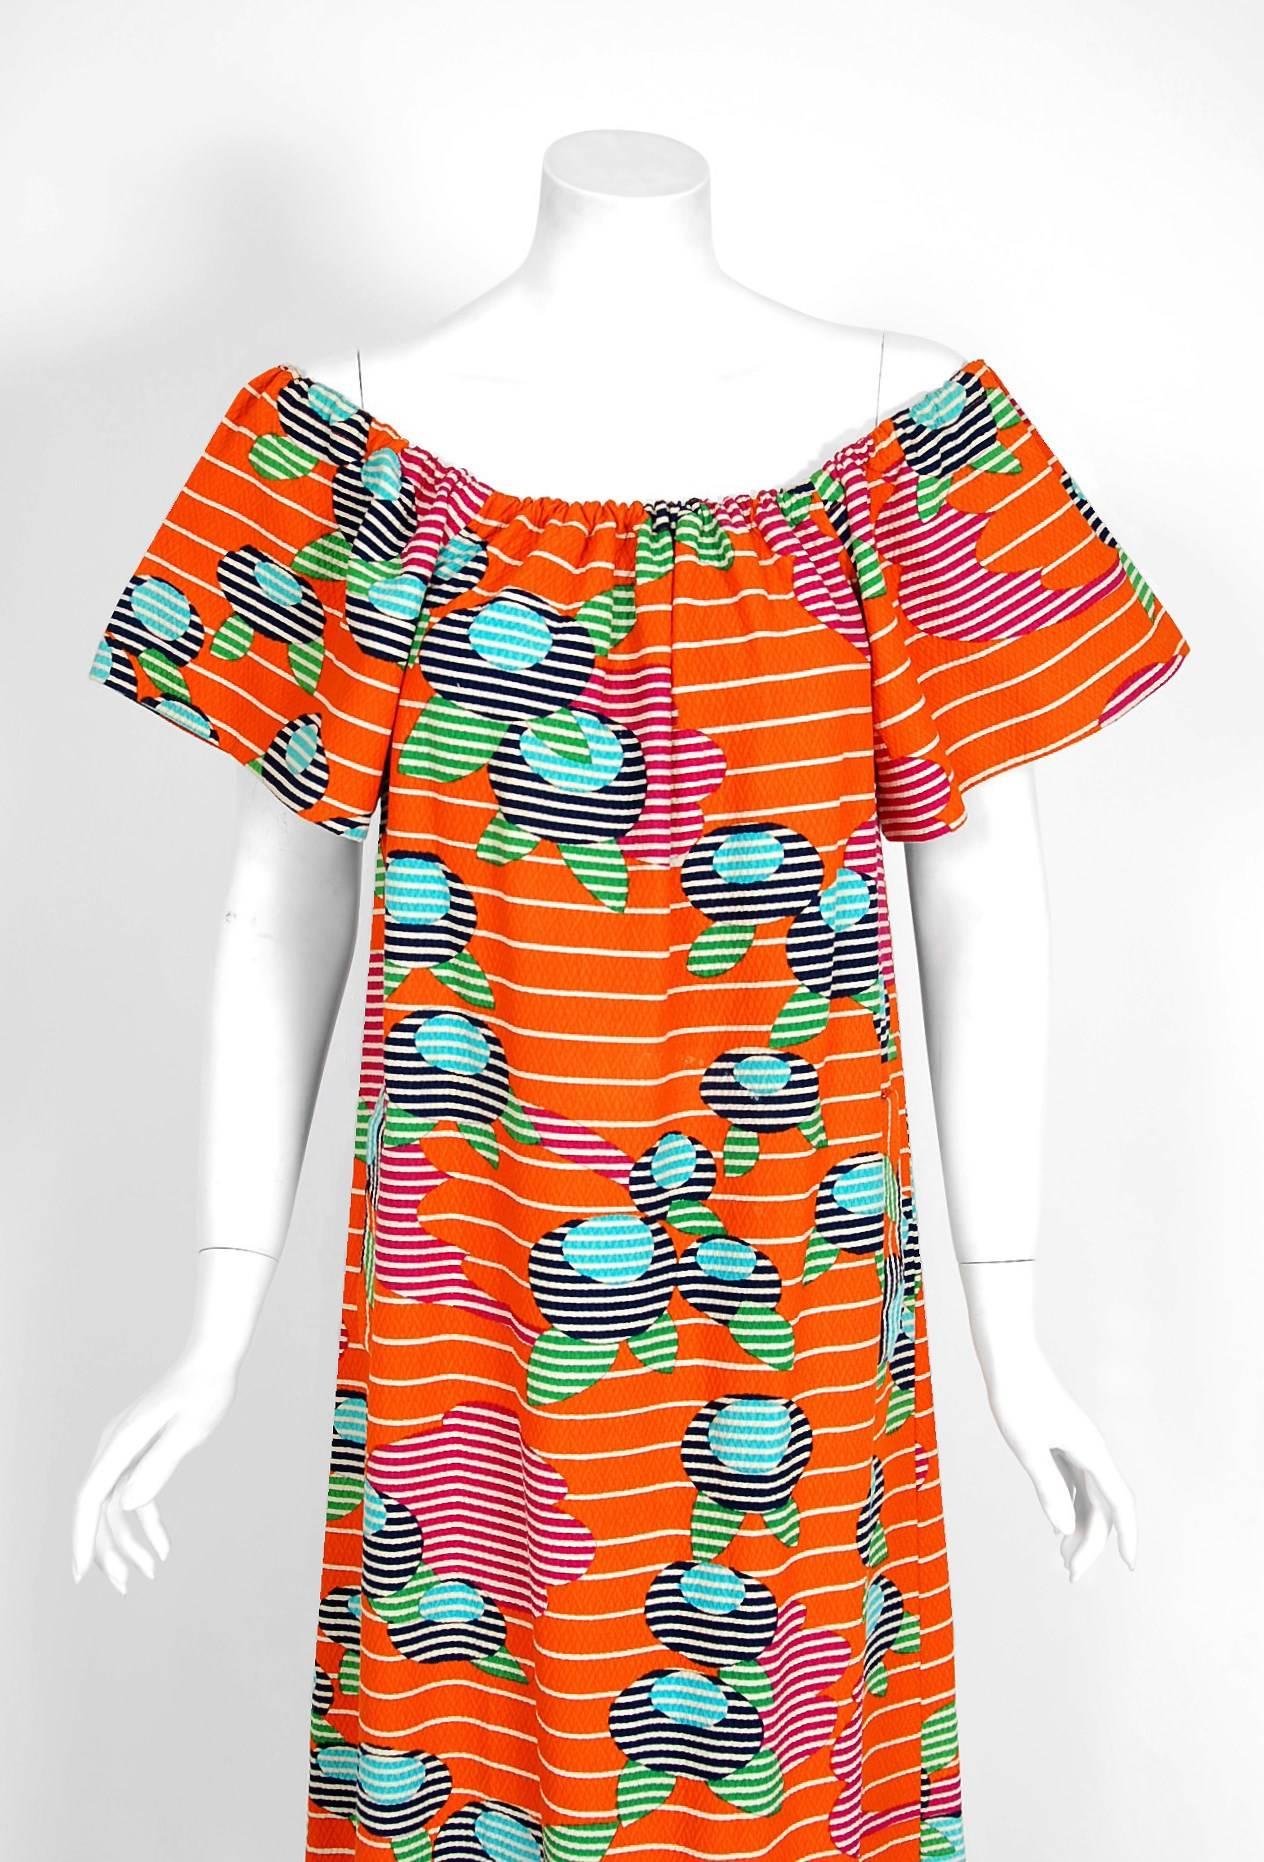 This extremely chic Lanvin treasure, in the most stunning op-art graphic textured cotton, is a statement dress. I love the rainbow of colors and modern peasant vibe. It manifests liveliness and makes you feel confident. Shaped with princess-line